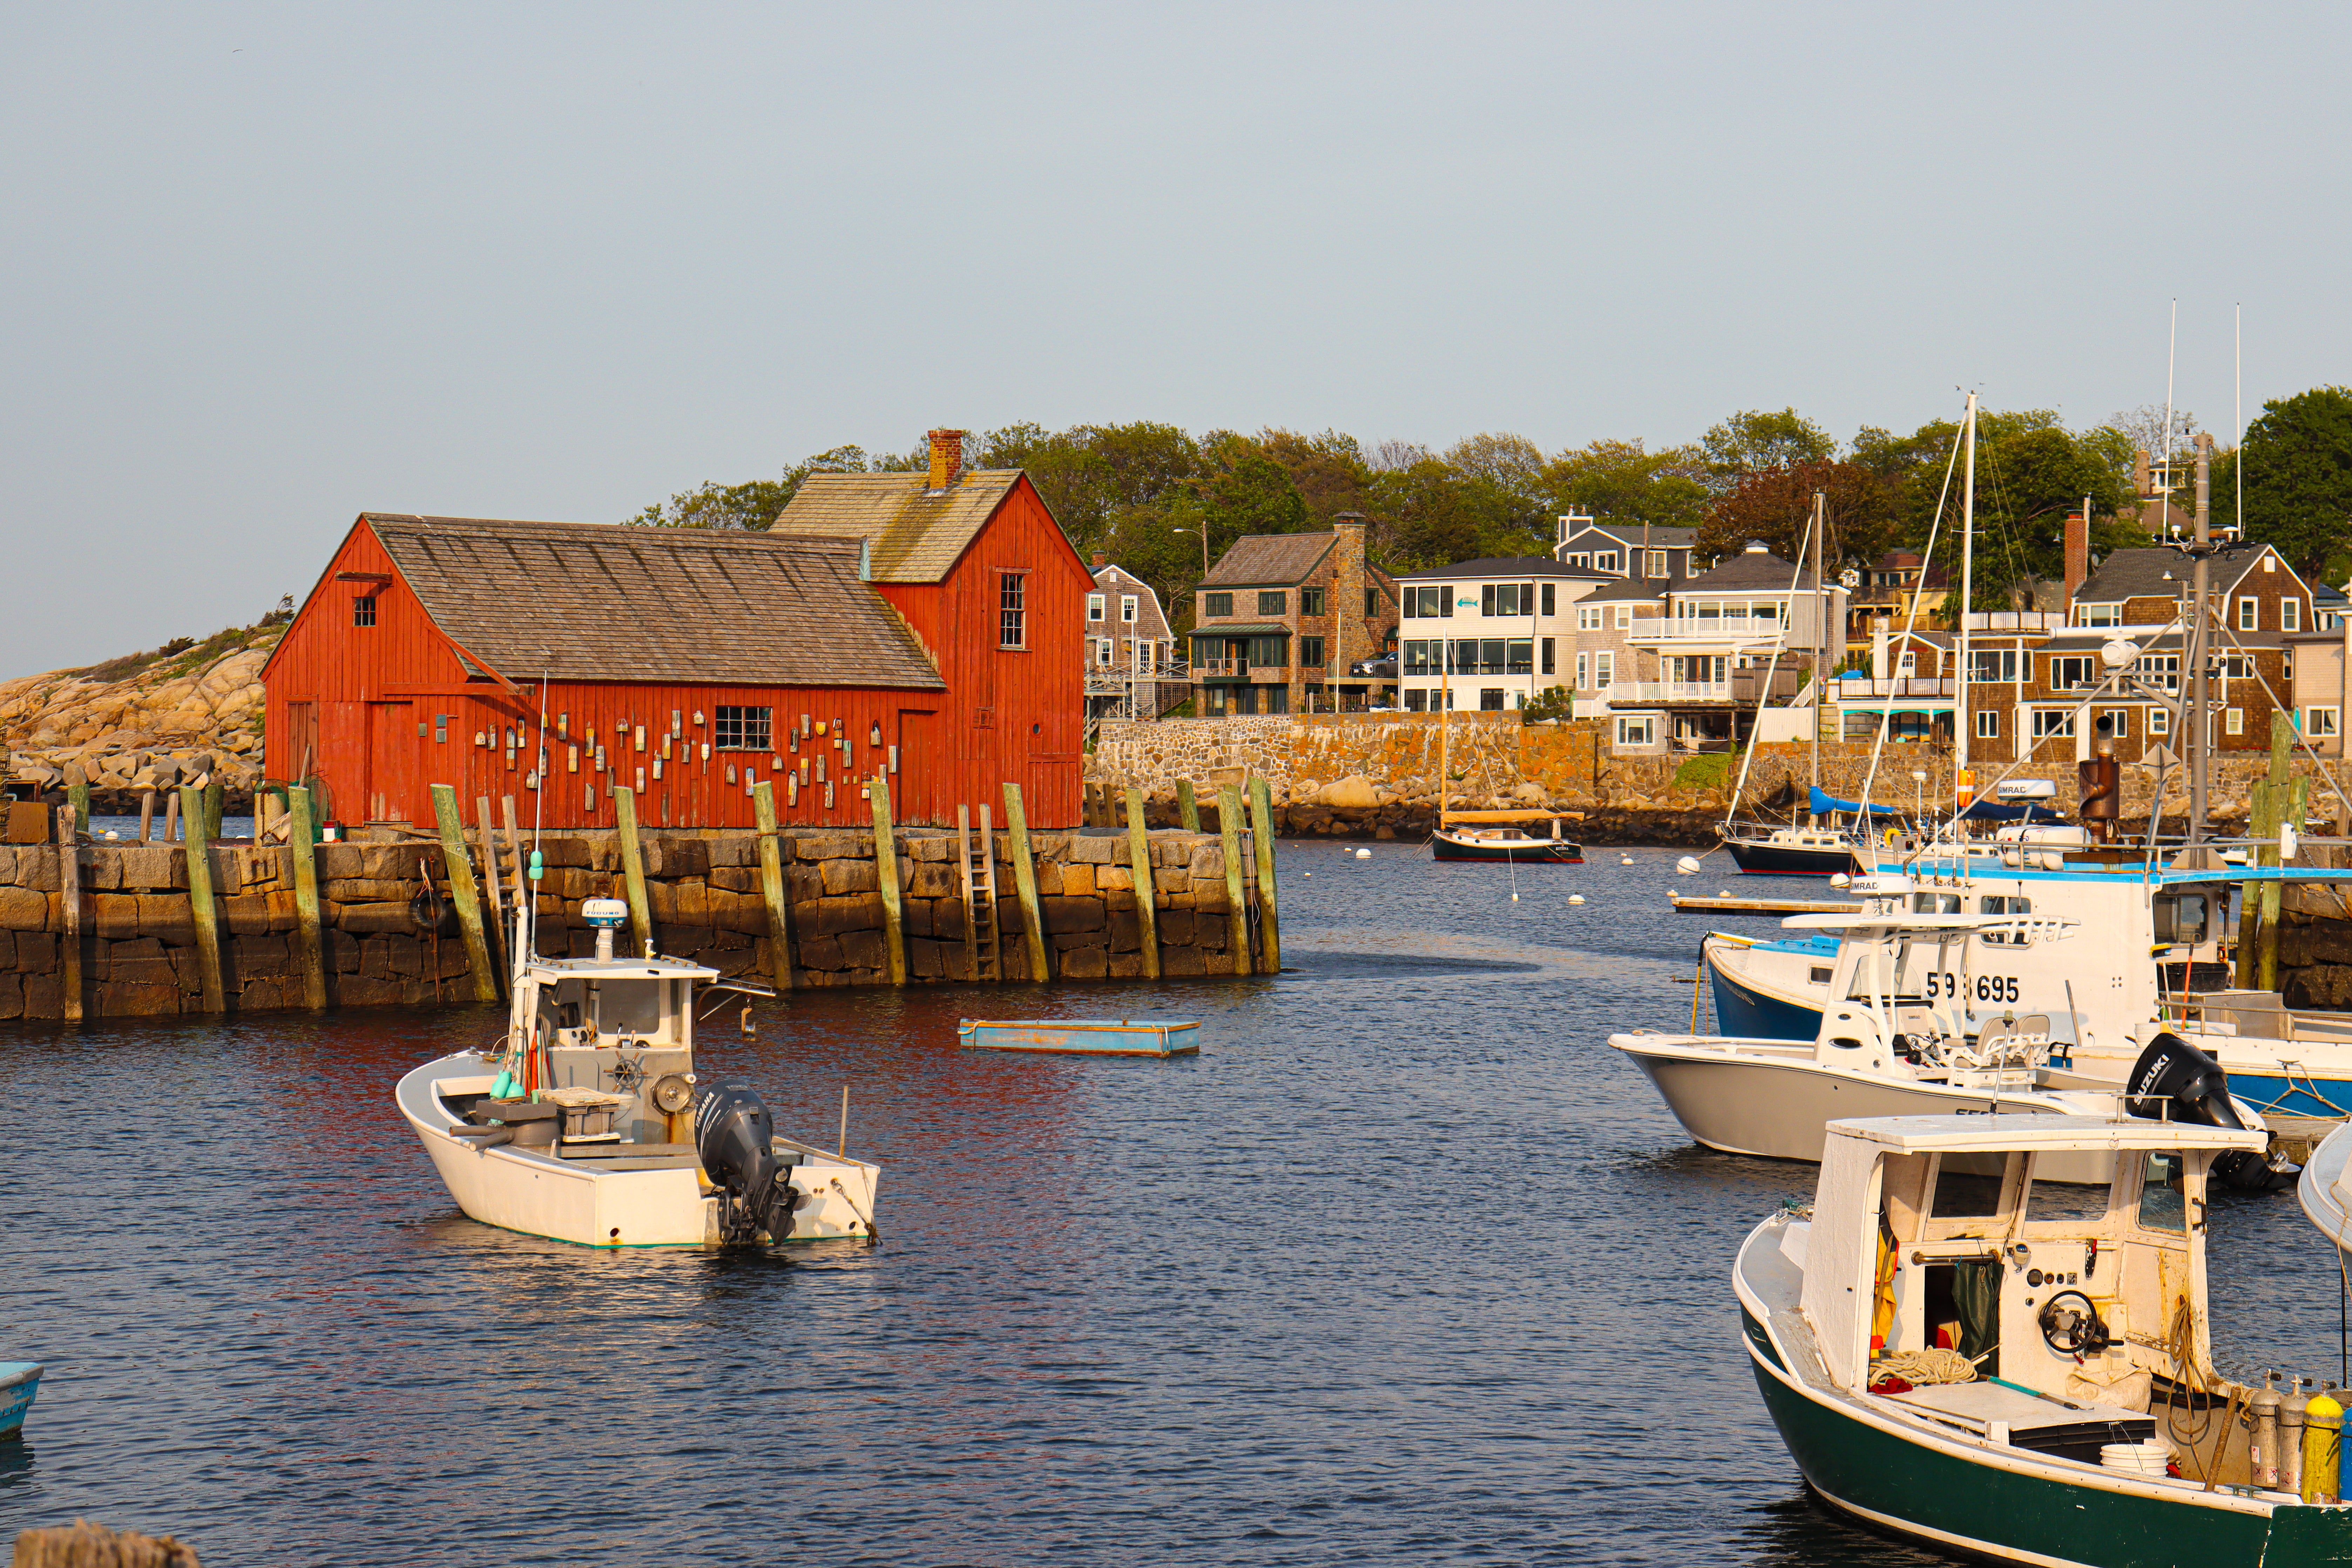 Rockport’s pretty harbour is an artist’s dream